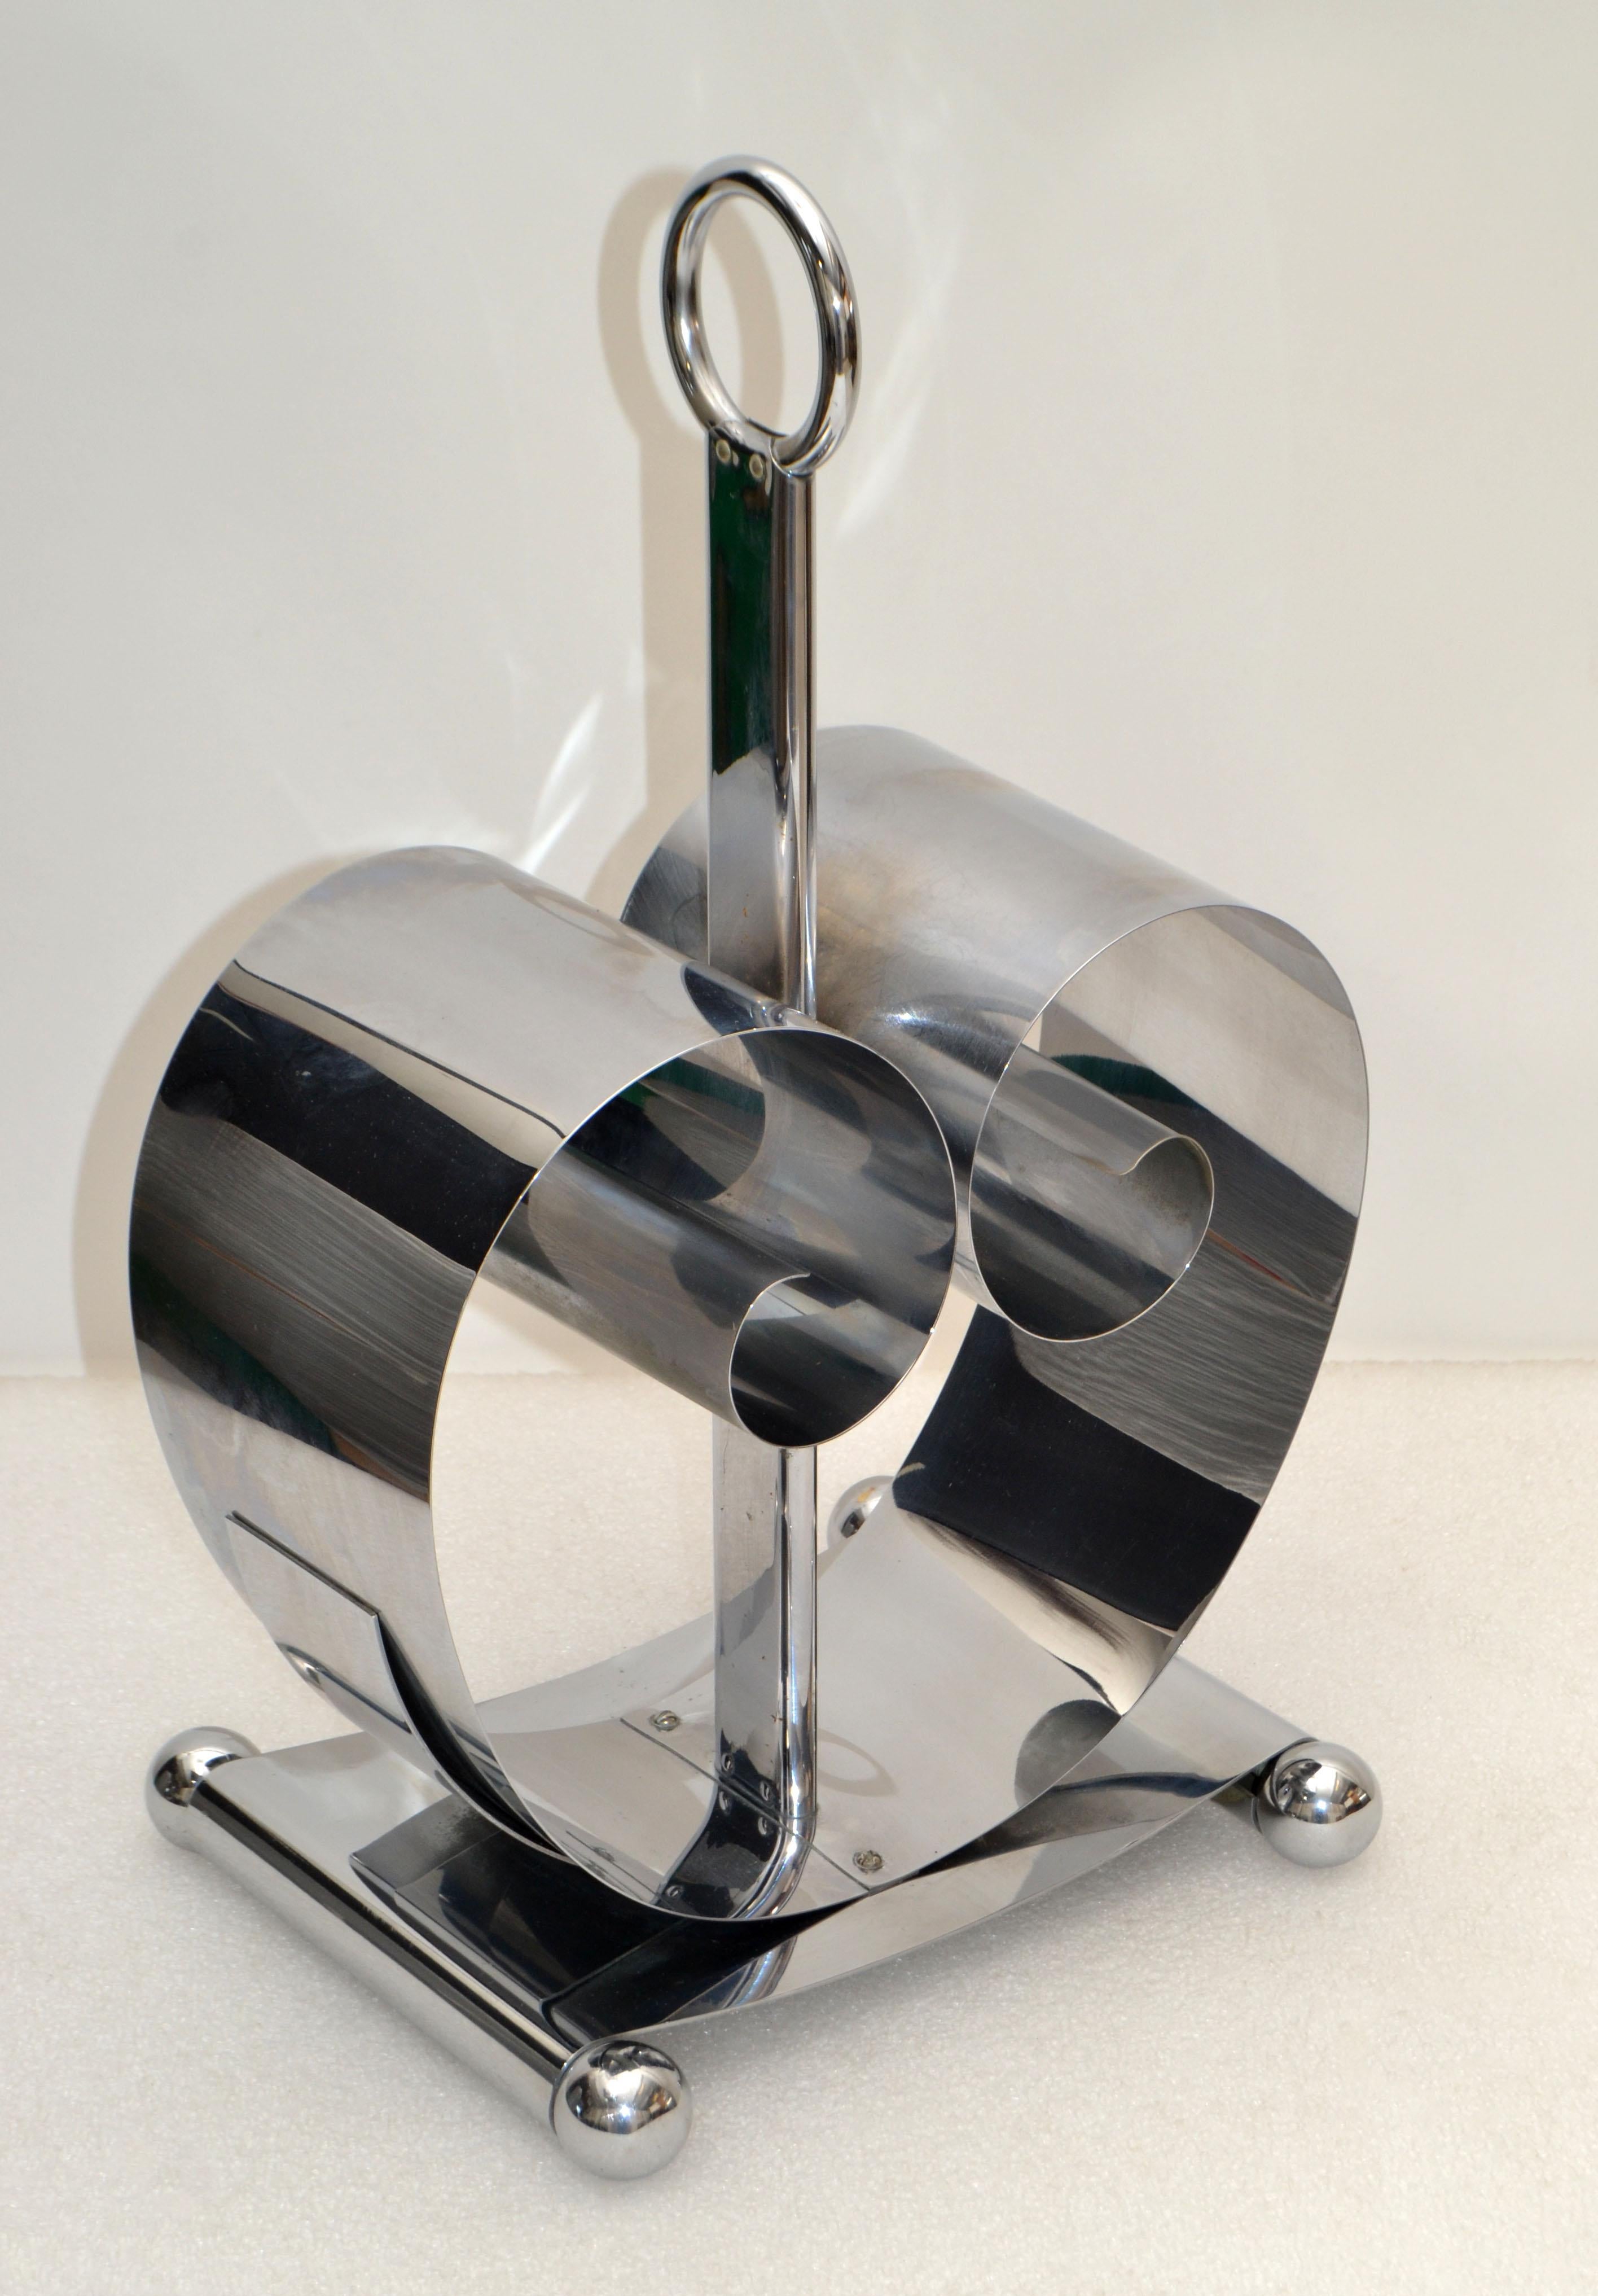 Art Deco Norman Bel Geddes Chrome Plated Stainless Steel Magazine Stand Rack 30s For Sale 3